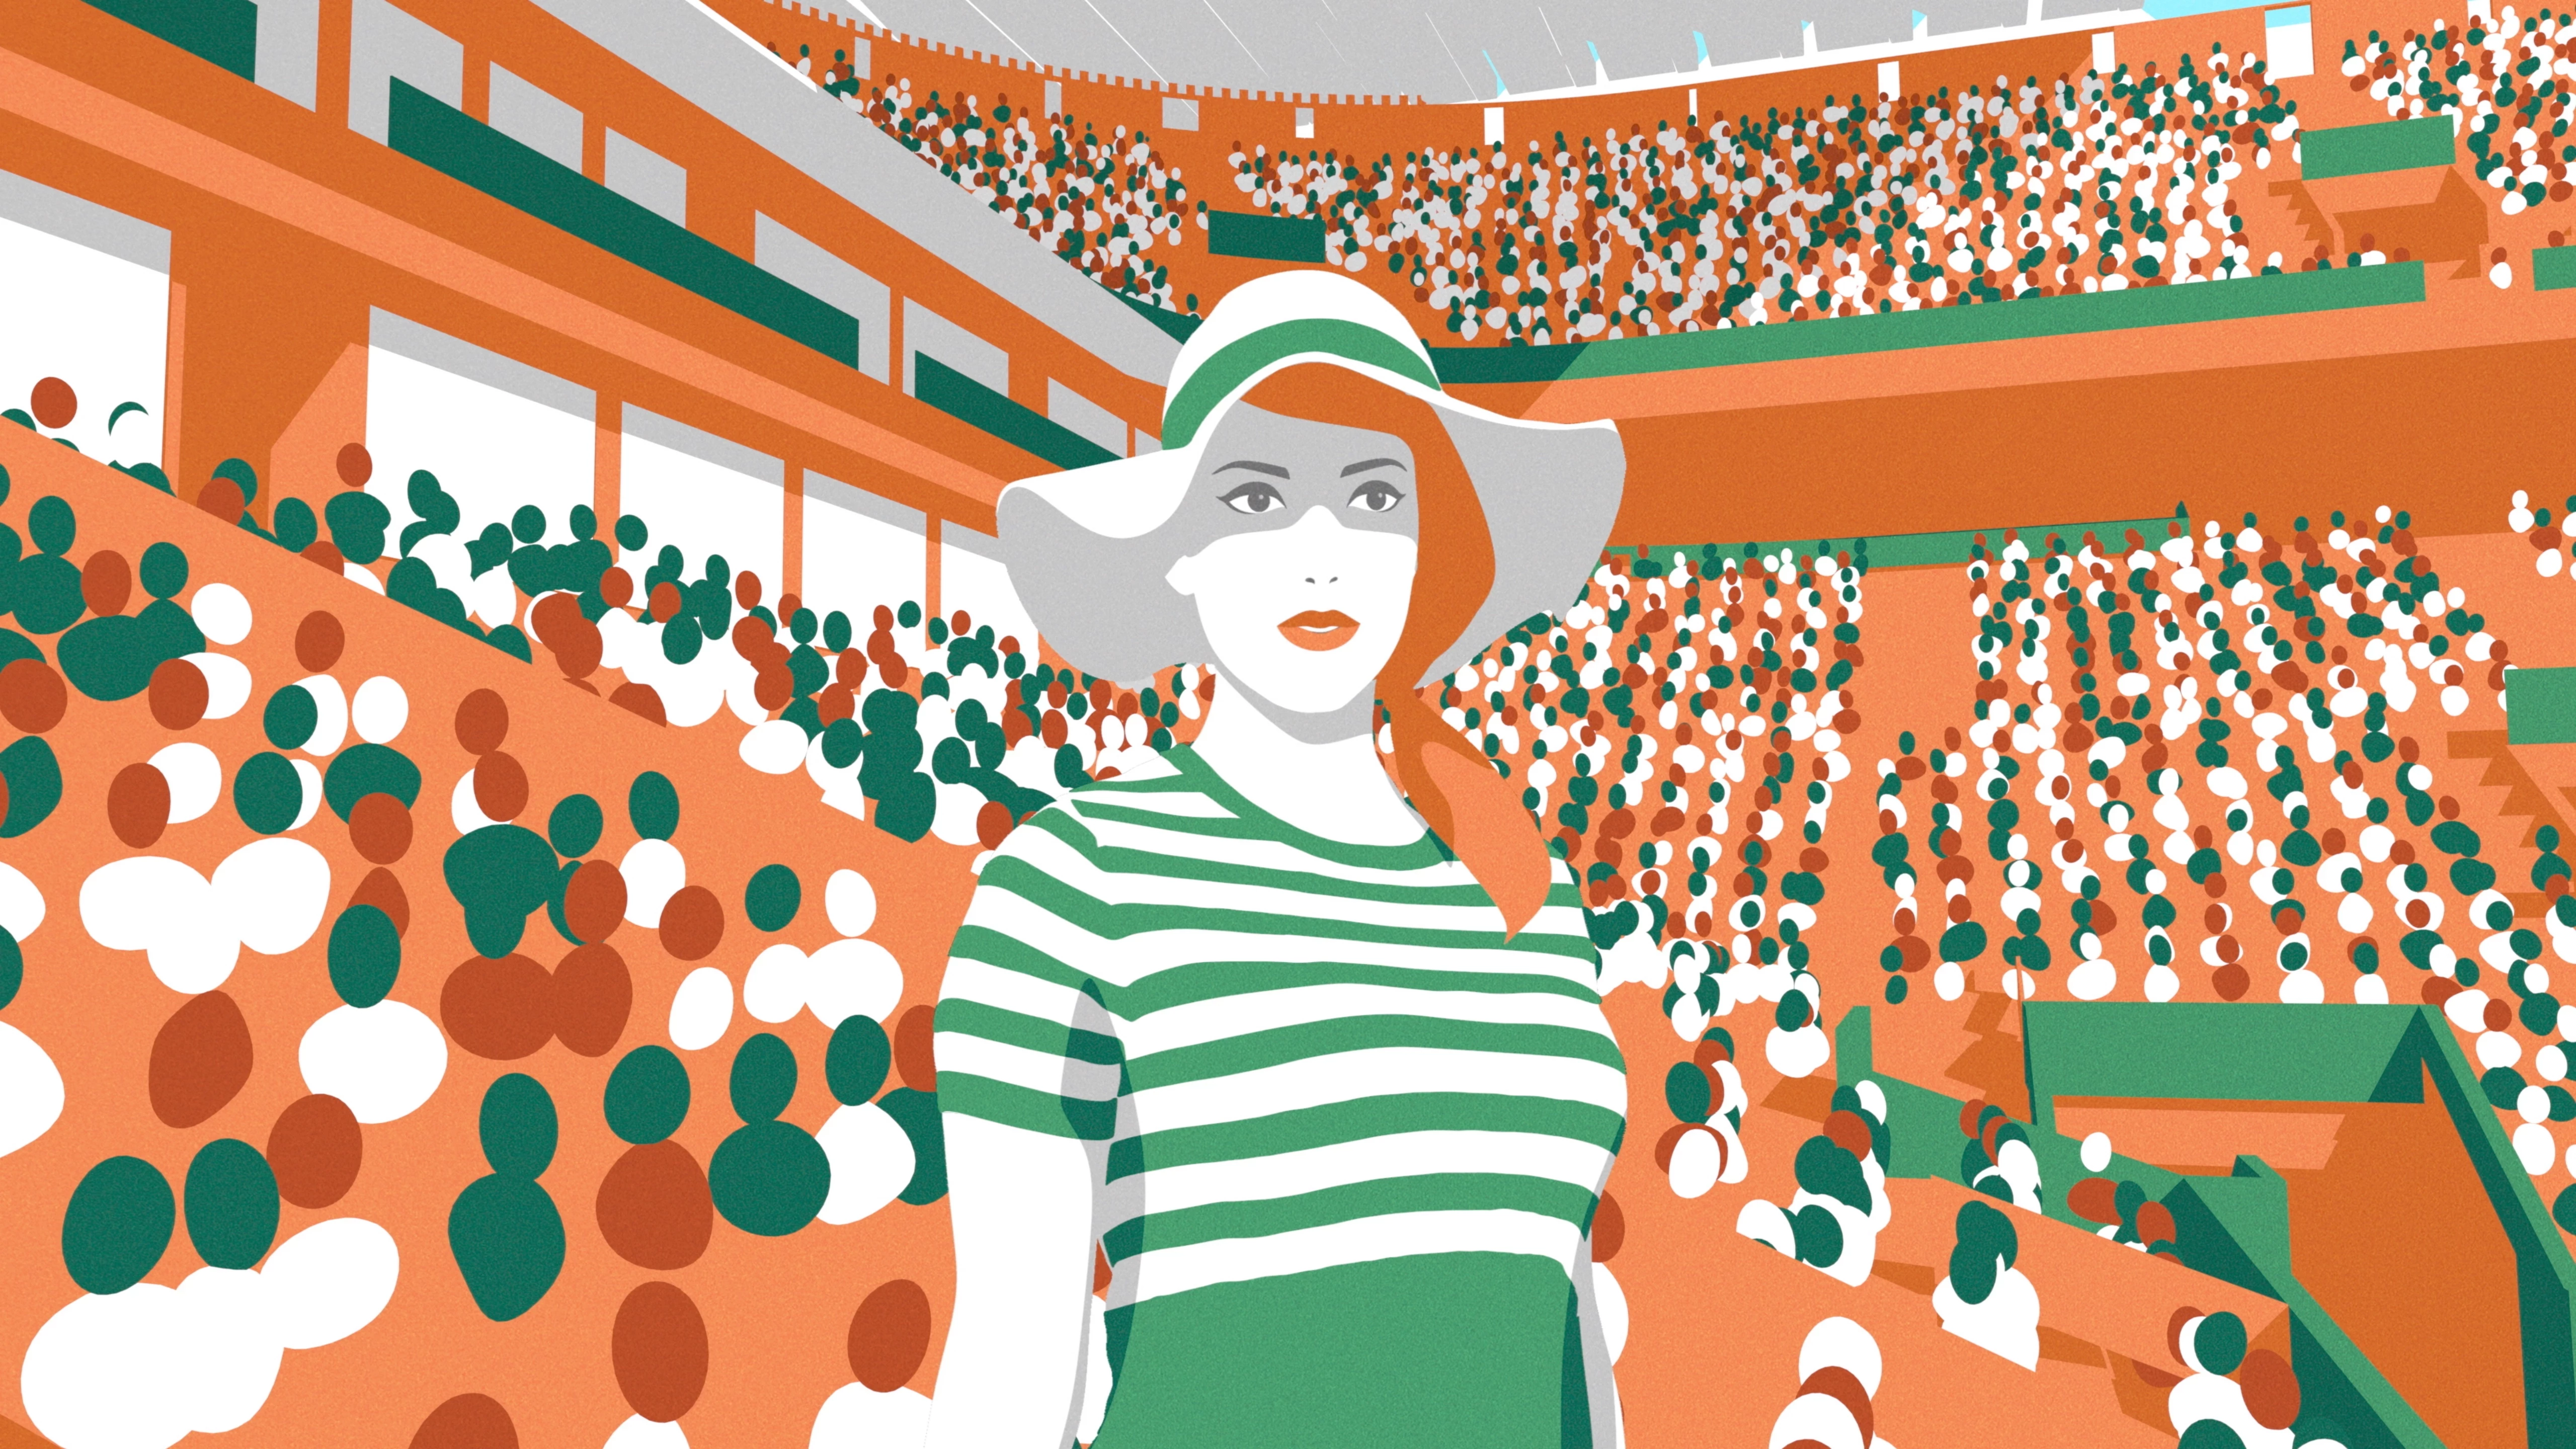 A woman enters the stadium